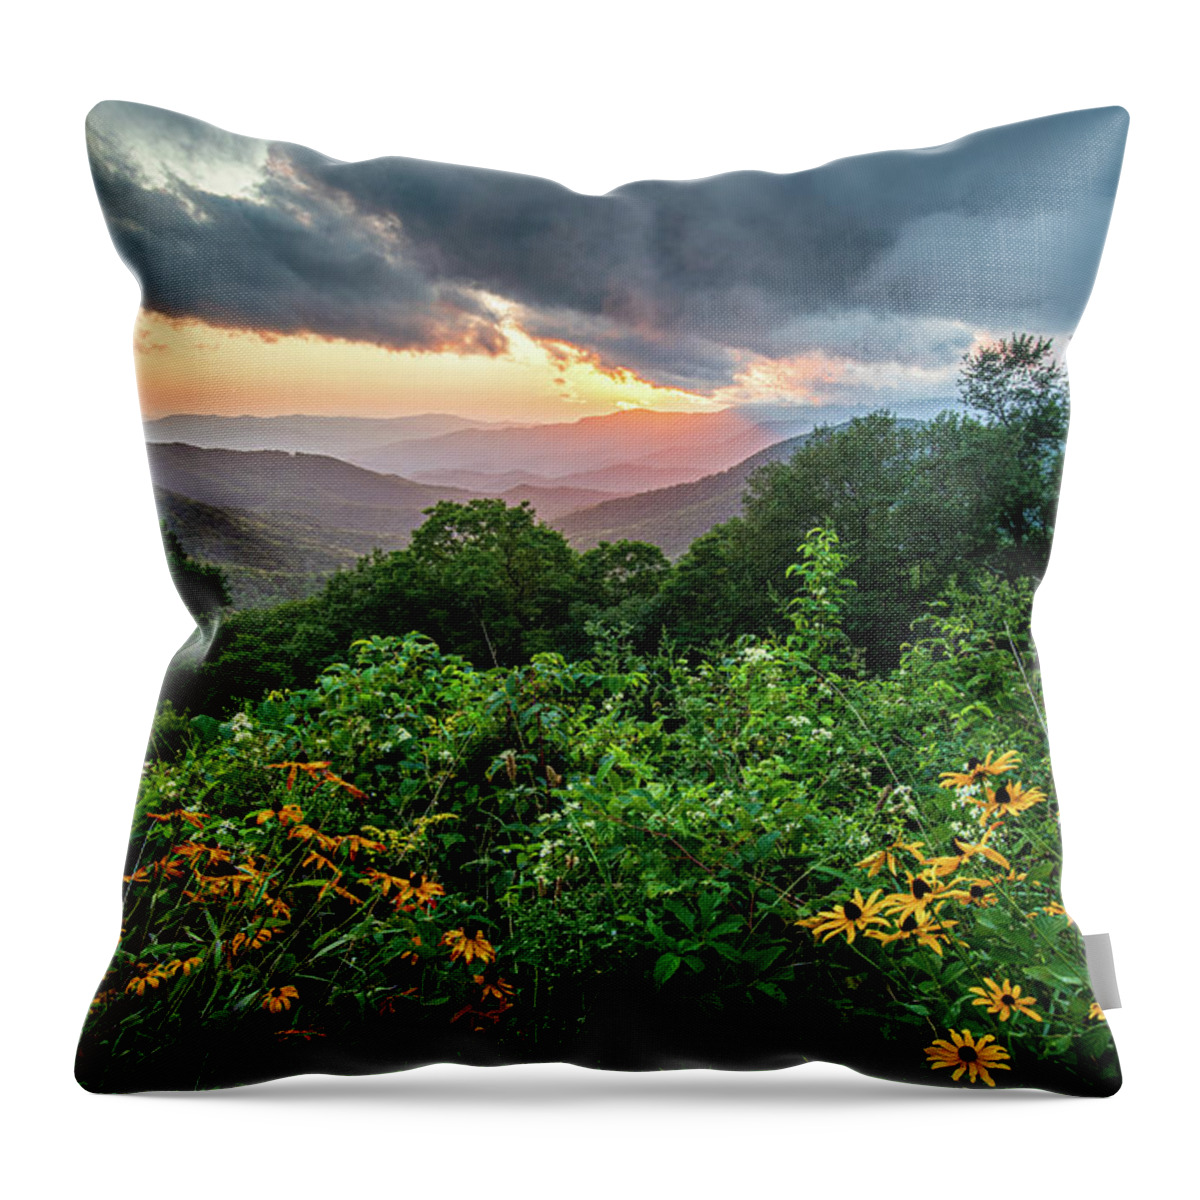 Evening Throw Pillow featuring the photograph Blue Ridge Parkway Asheville NC Wildflower Sunset Scenic by Robert Stephens